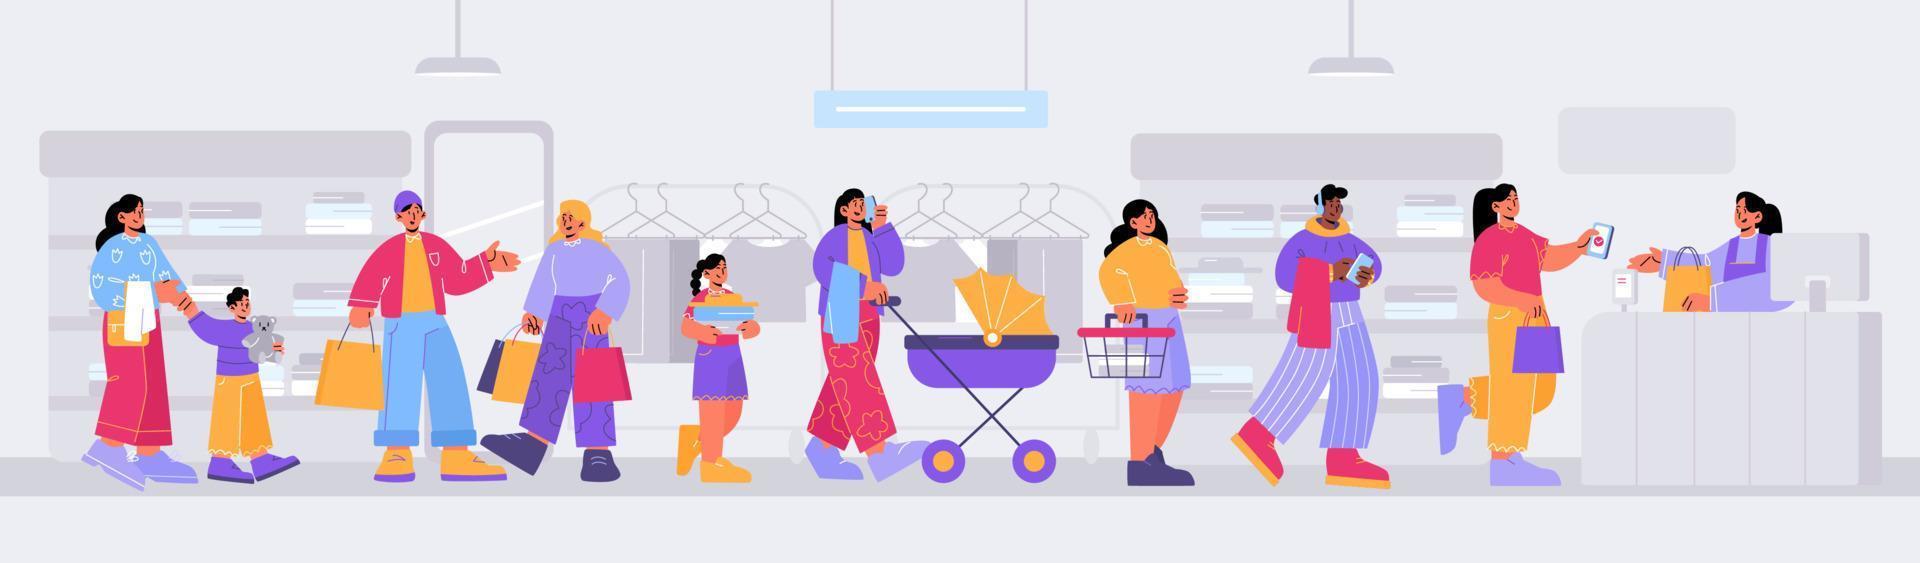 Fashion store with people waiting in queue vector